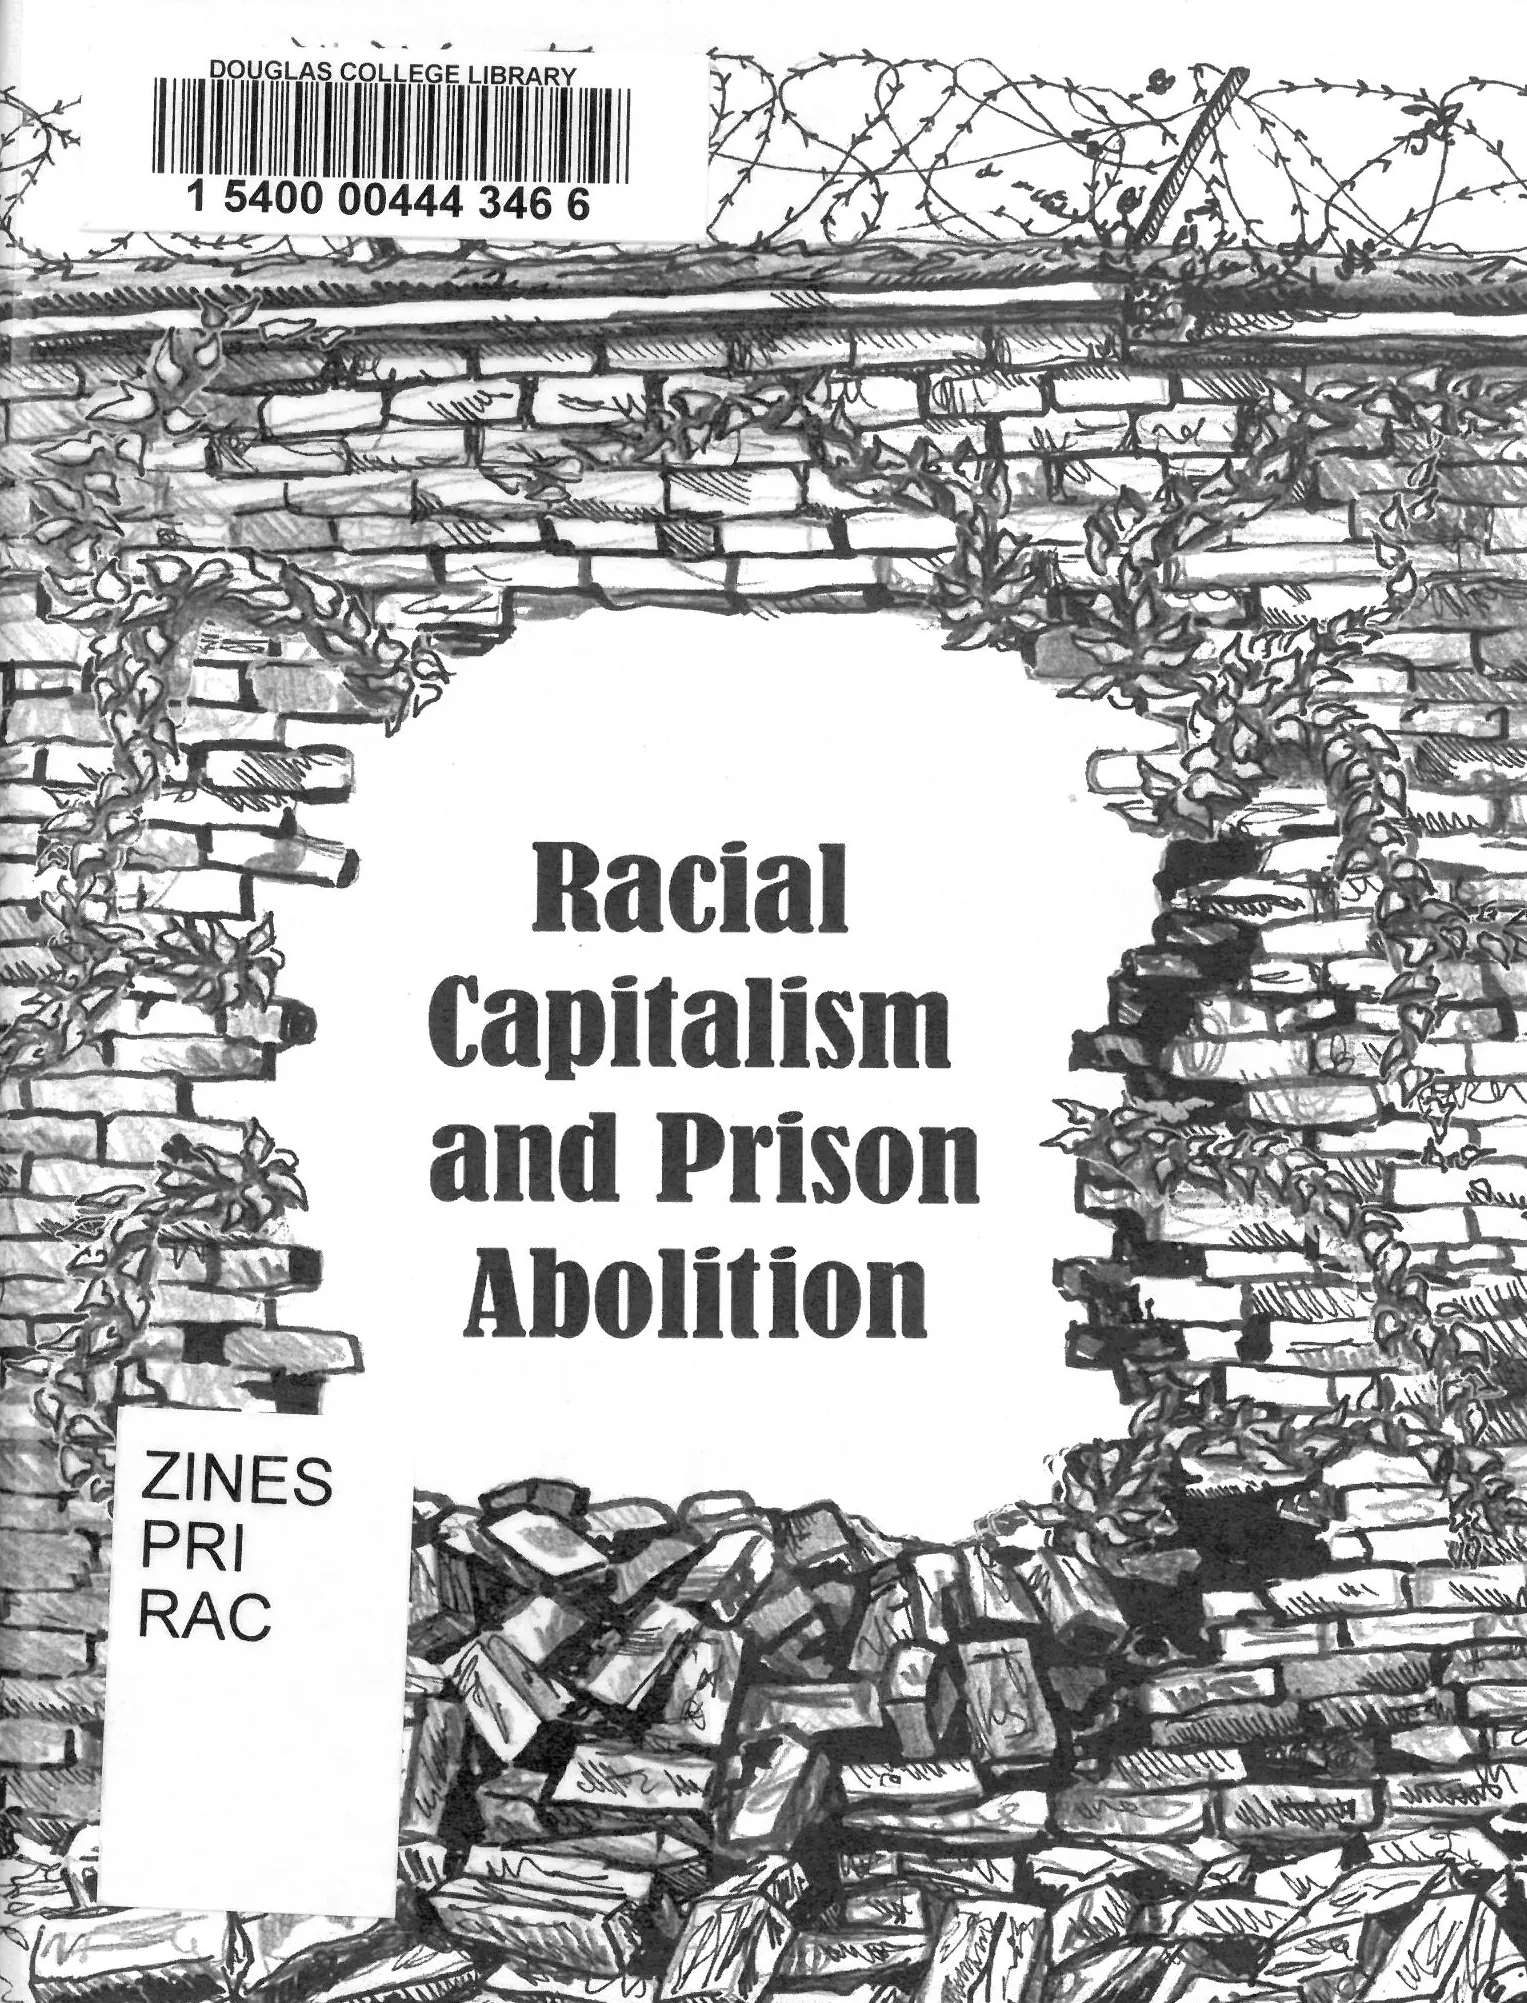 Racial capitalism and prison abolition